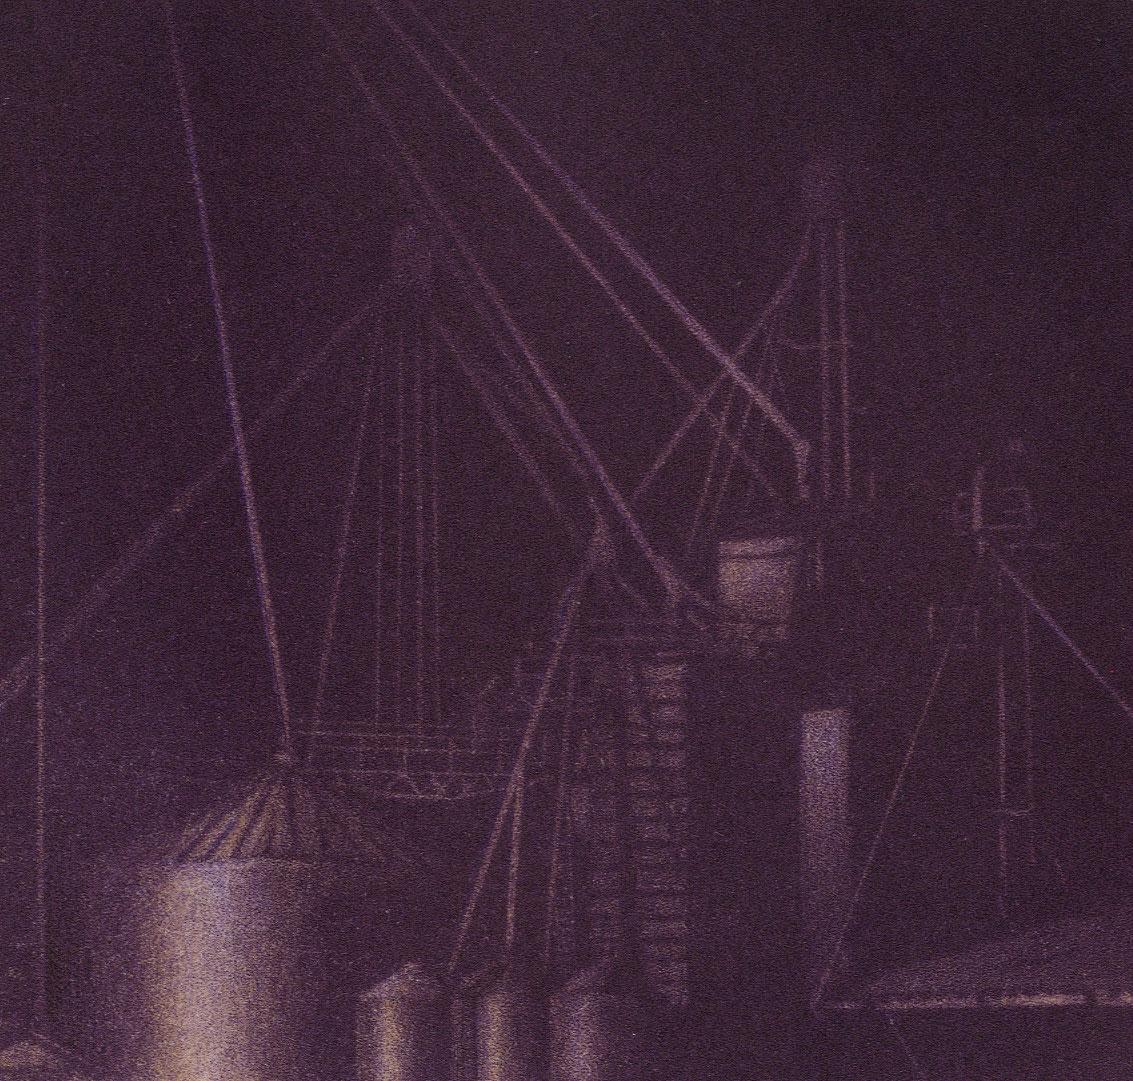 421 Nights: Reach (Silos on Highway 421) - Print by Donald Furst